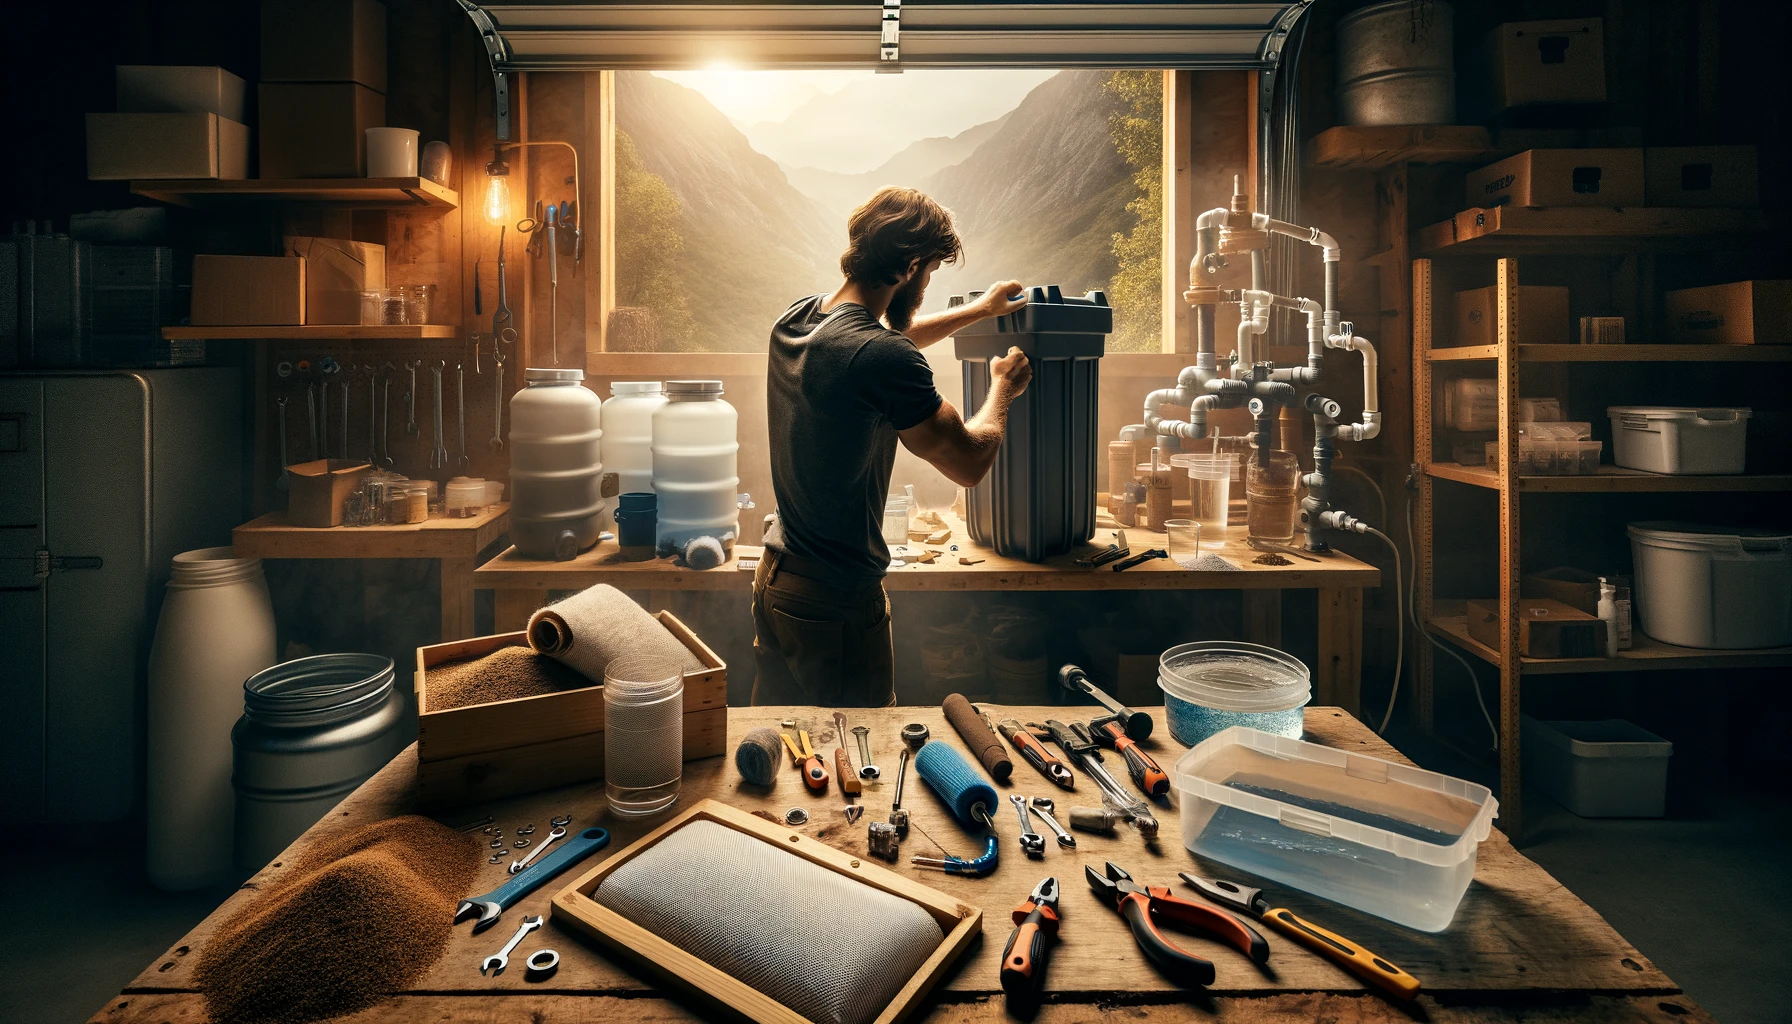 Dynamic scene of assembling a DIY water filtration system in a garage workshop, with tools, parts, and natural filtration materials on a wooden workbench, under warm lighting, blending craftsmanship with survival preparedness